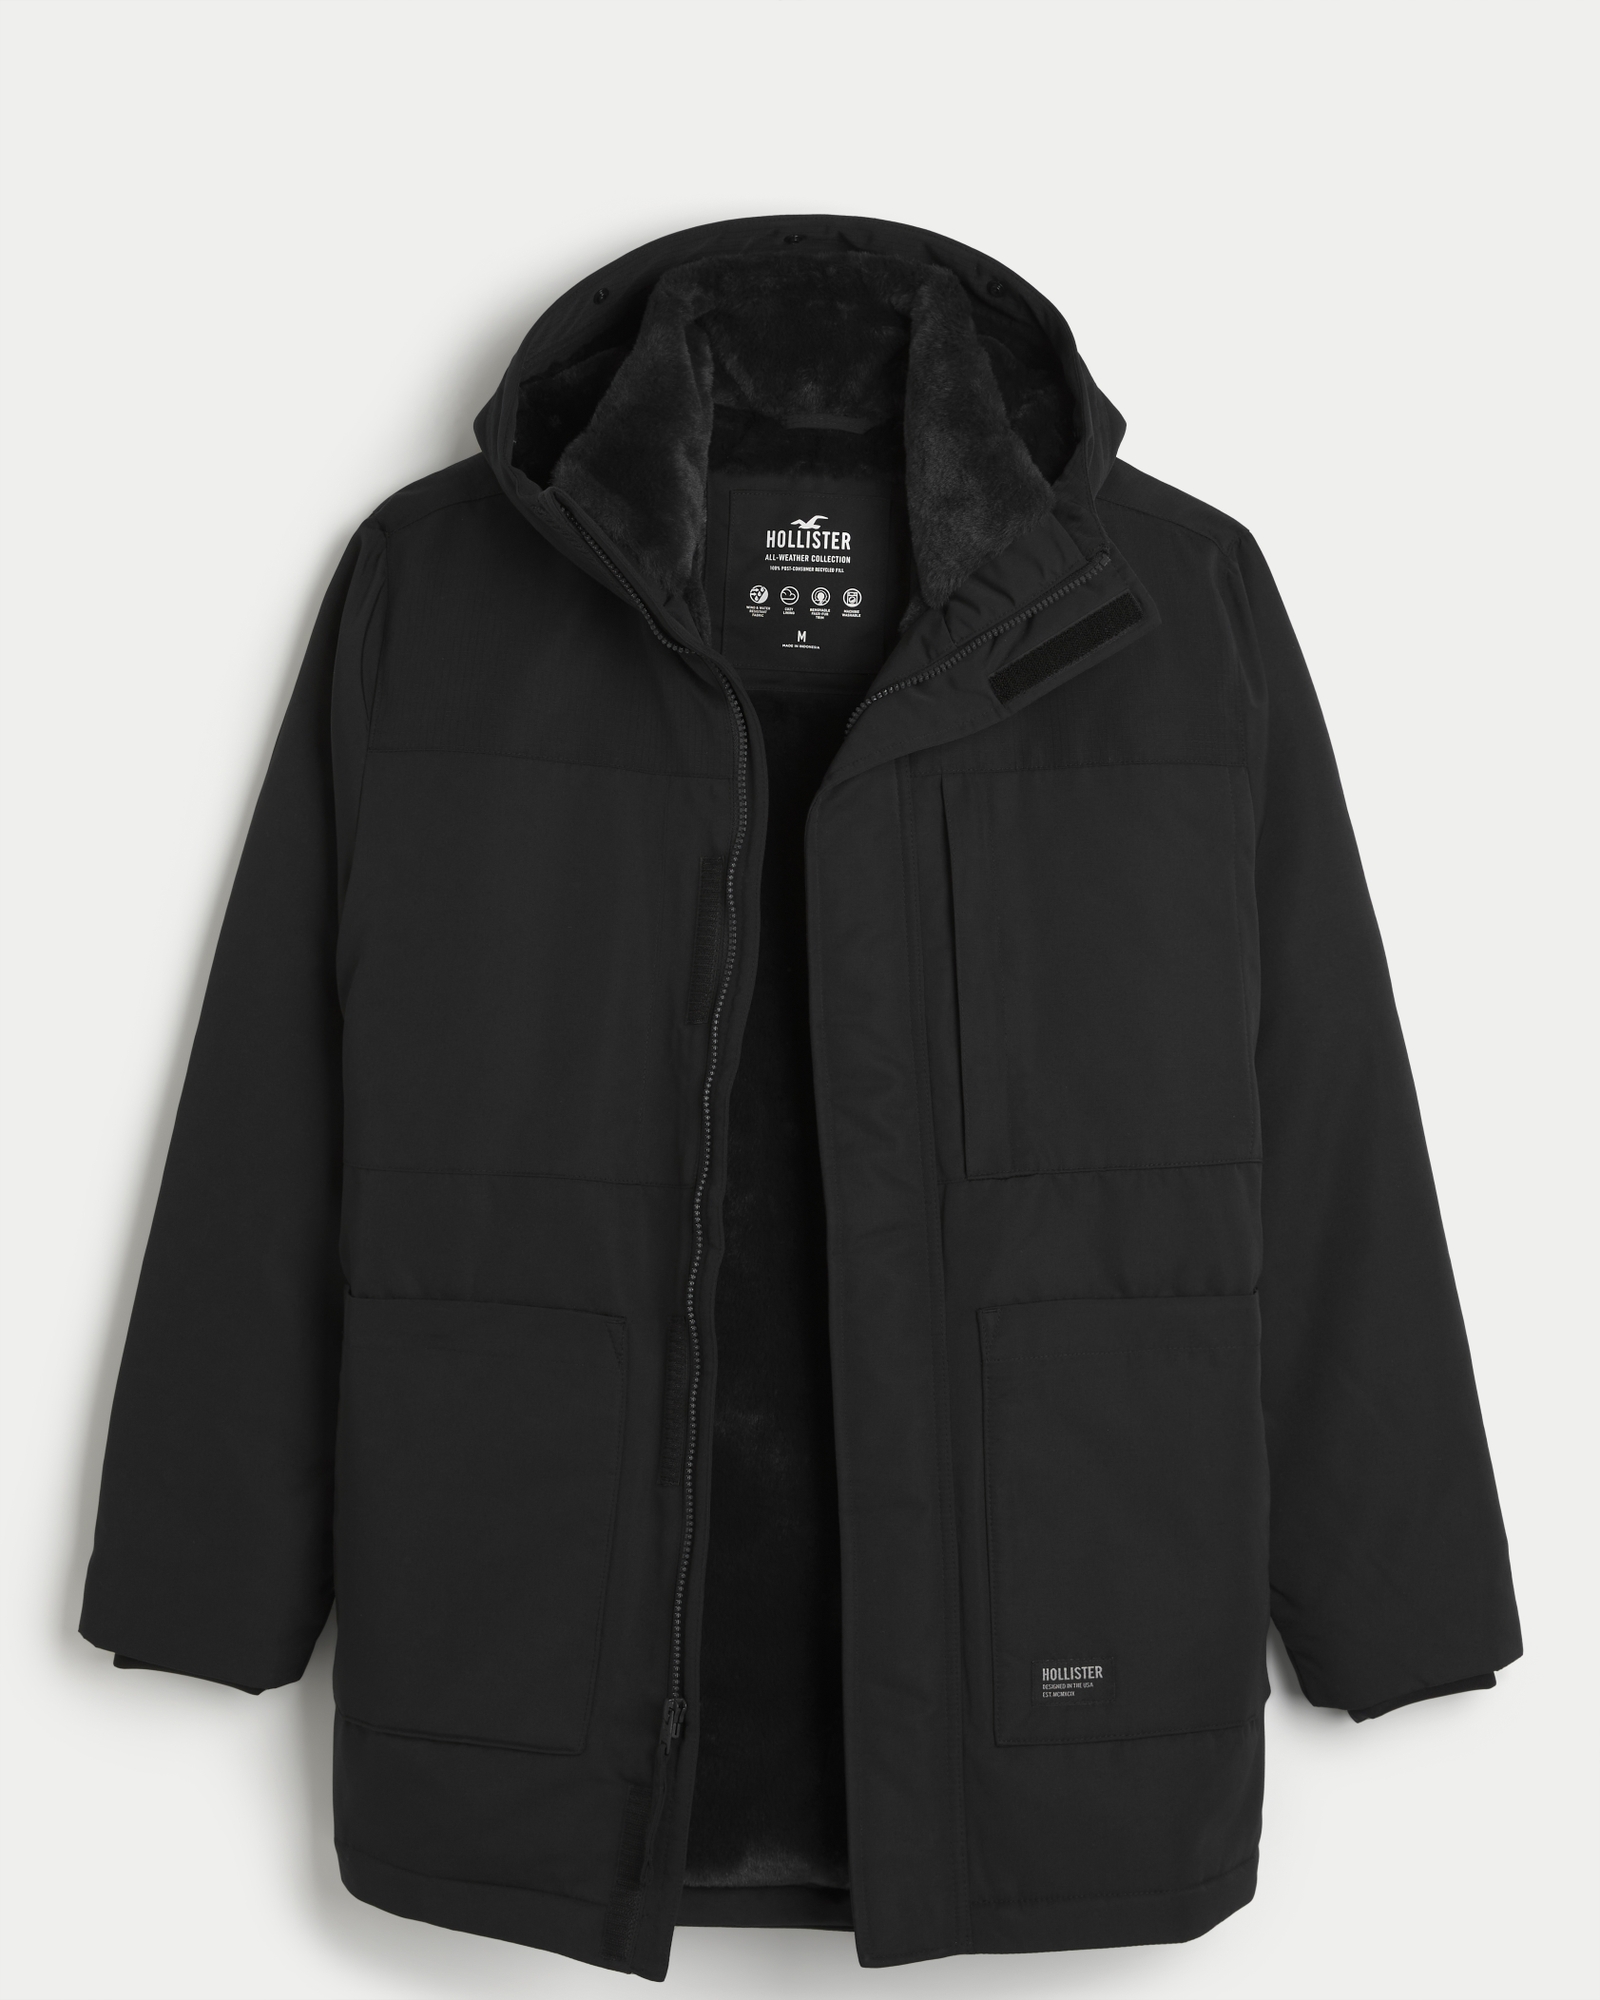 Men's All-Weather Winter Parka, Men's Clearance